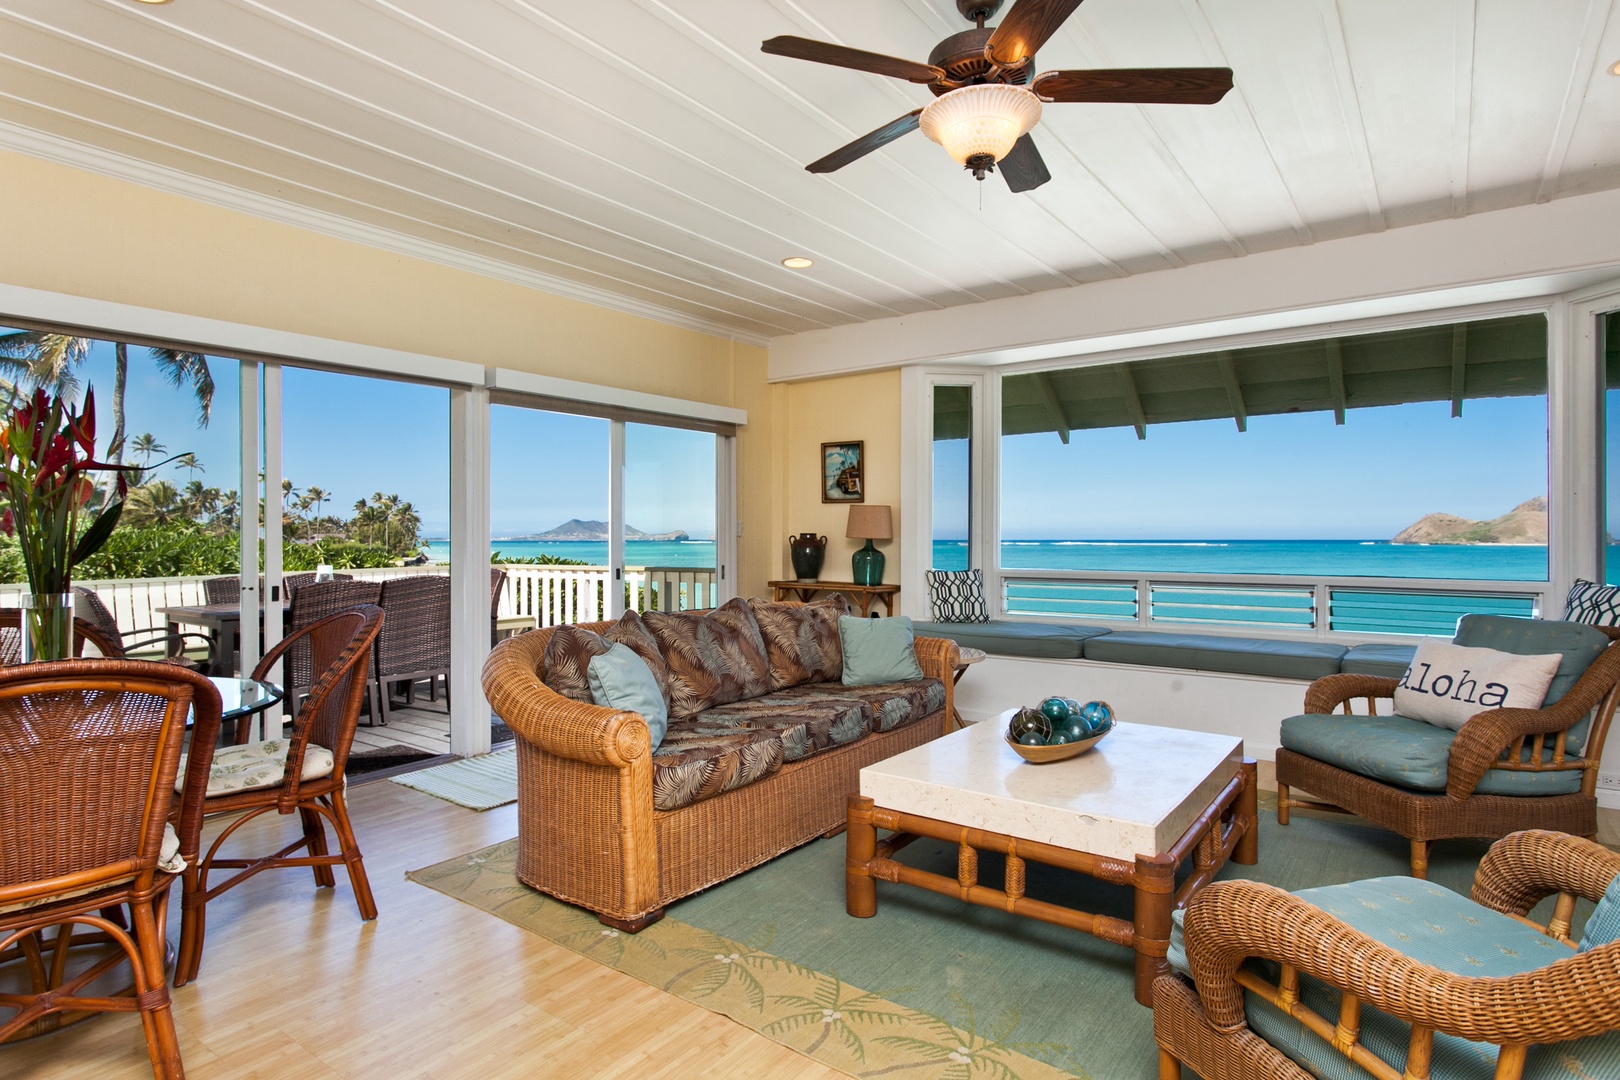 Kailua Vacation Rentals, Hale Kainalu* - Inviting and airy, the living room offers a seamless blend of comfort and style.